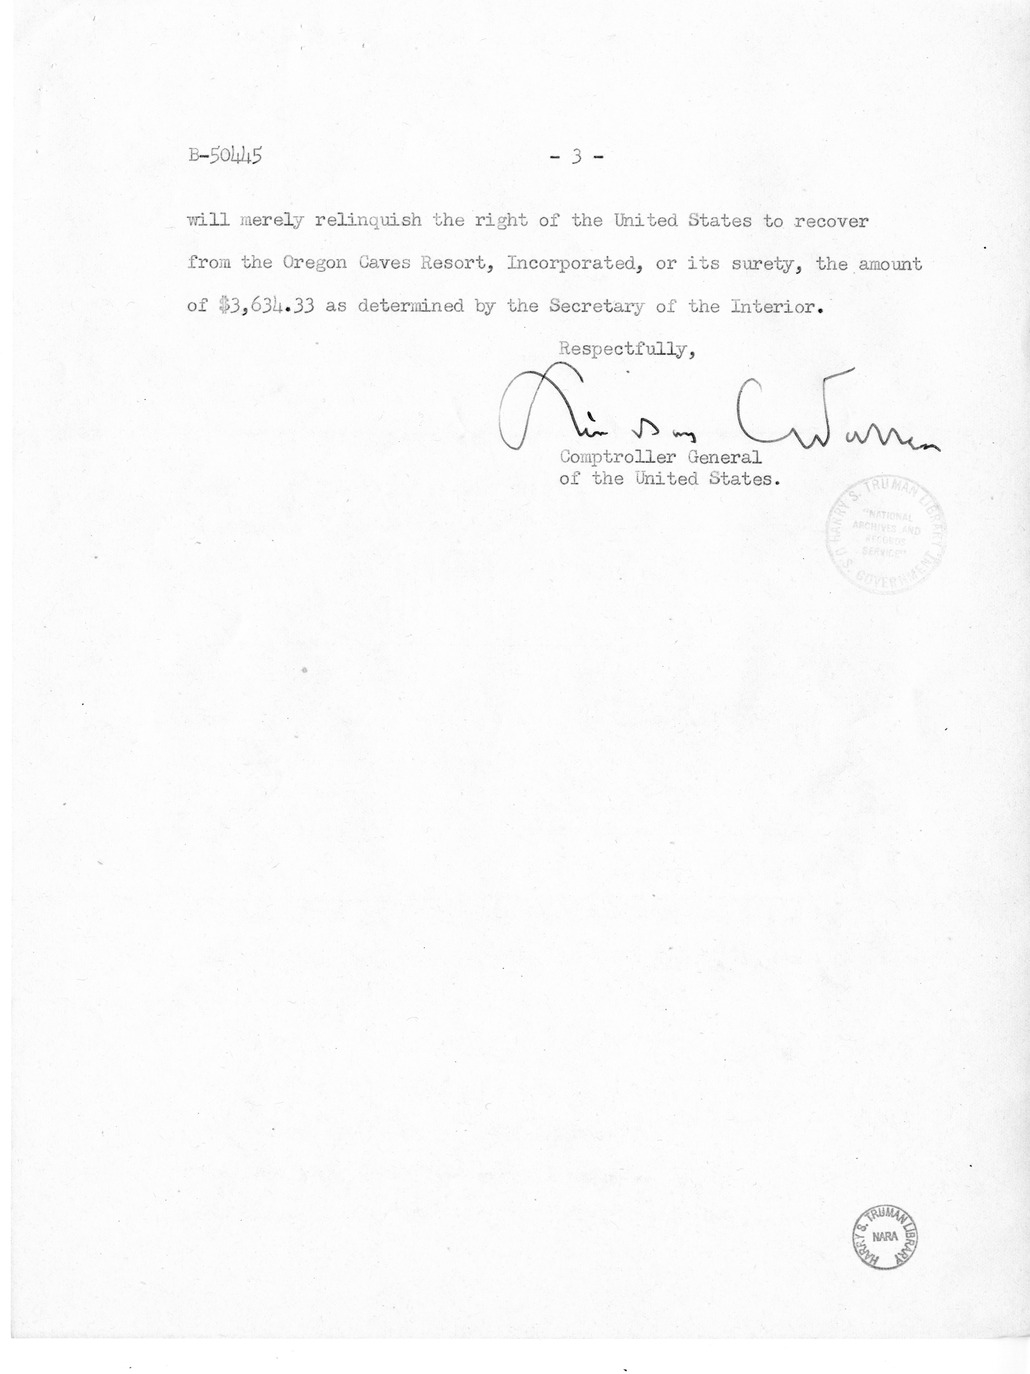 Memorandum from Paul H. Appleby to M. C. Latta, S. 136, For the Relief of the Oregon Caves Resort, with Attachments